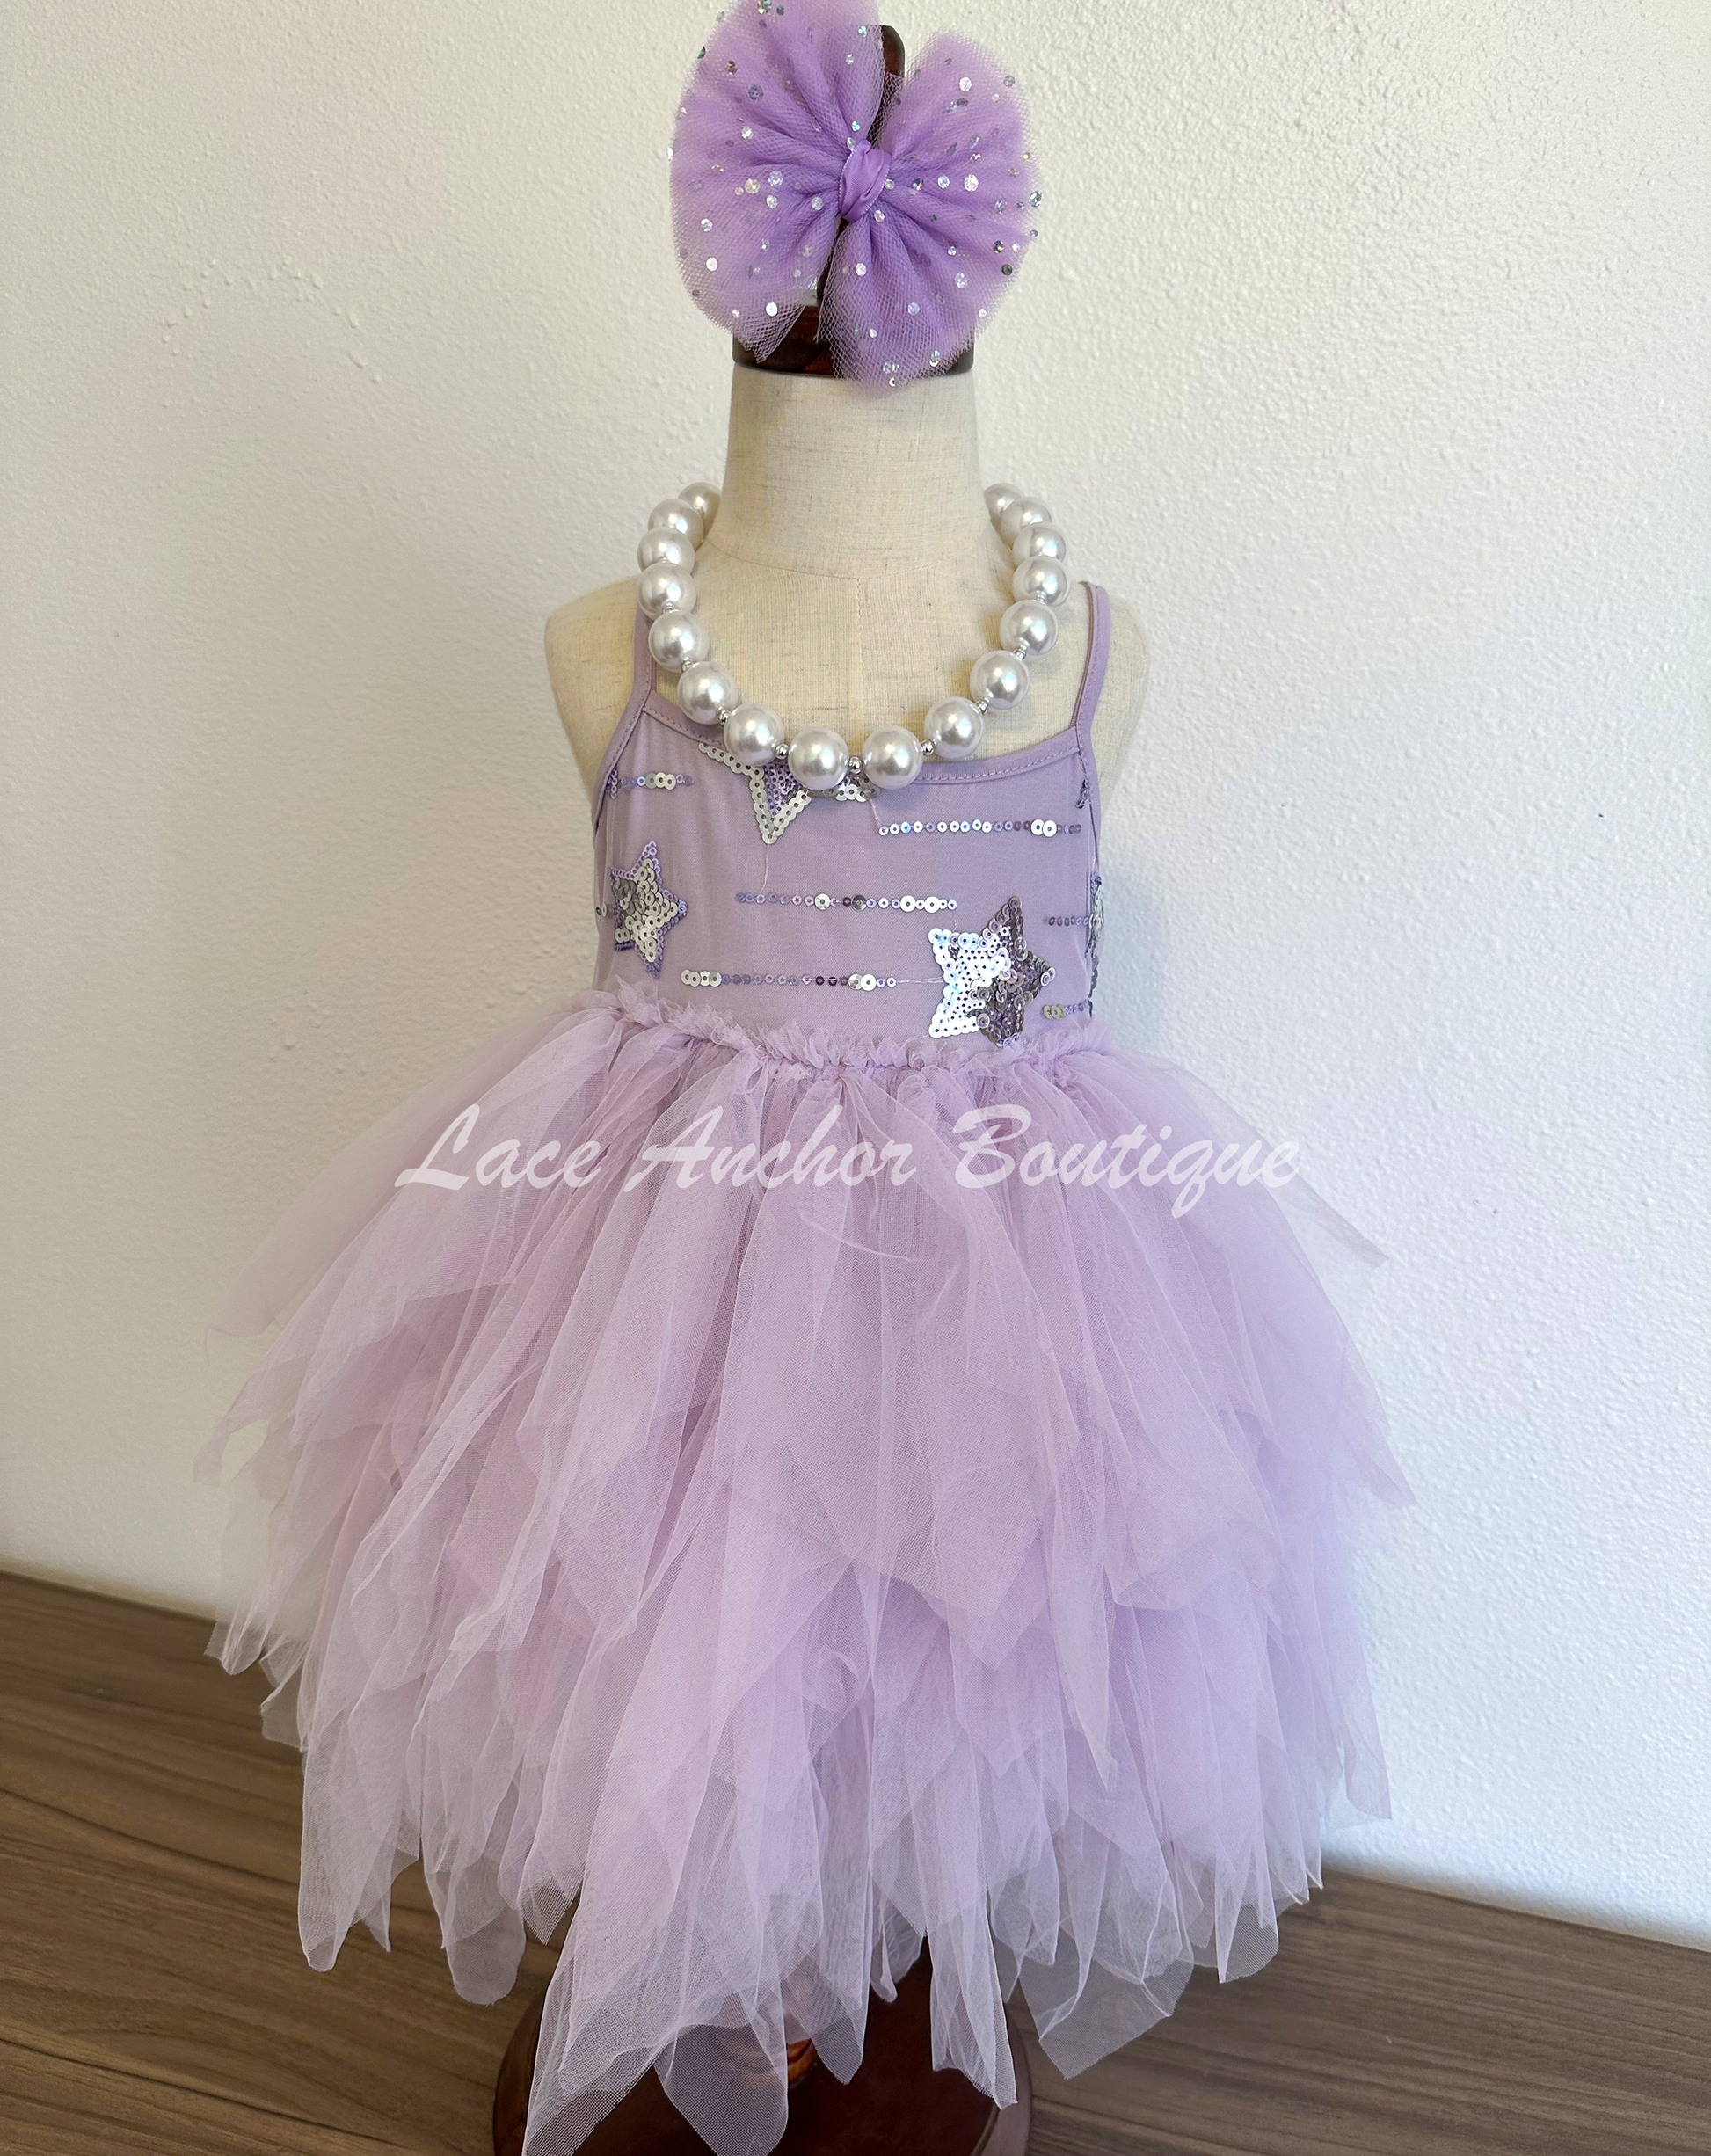 lilac purple toddler youth girls dress with silver sequin stars on top, thin straps, and messy fringed layered tulle skirt. Girl princes dress.